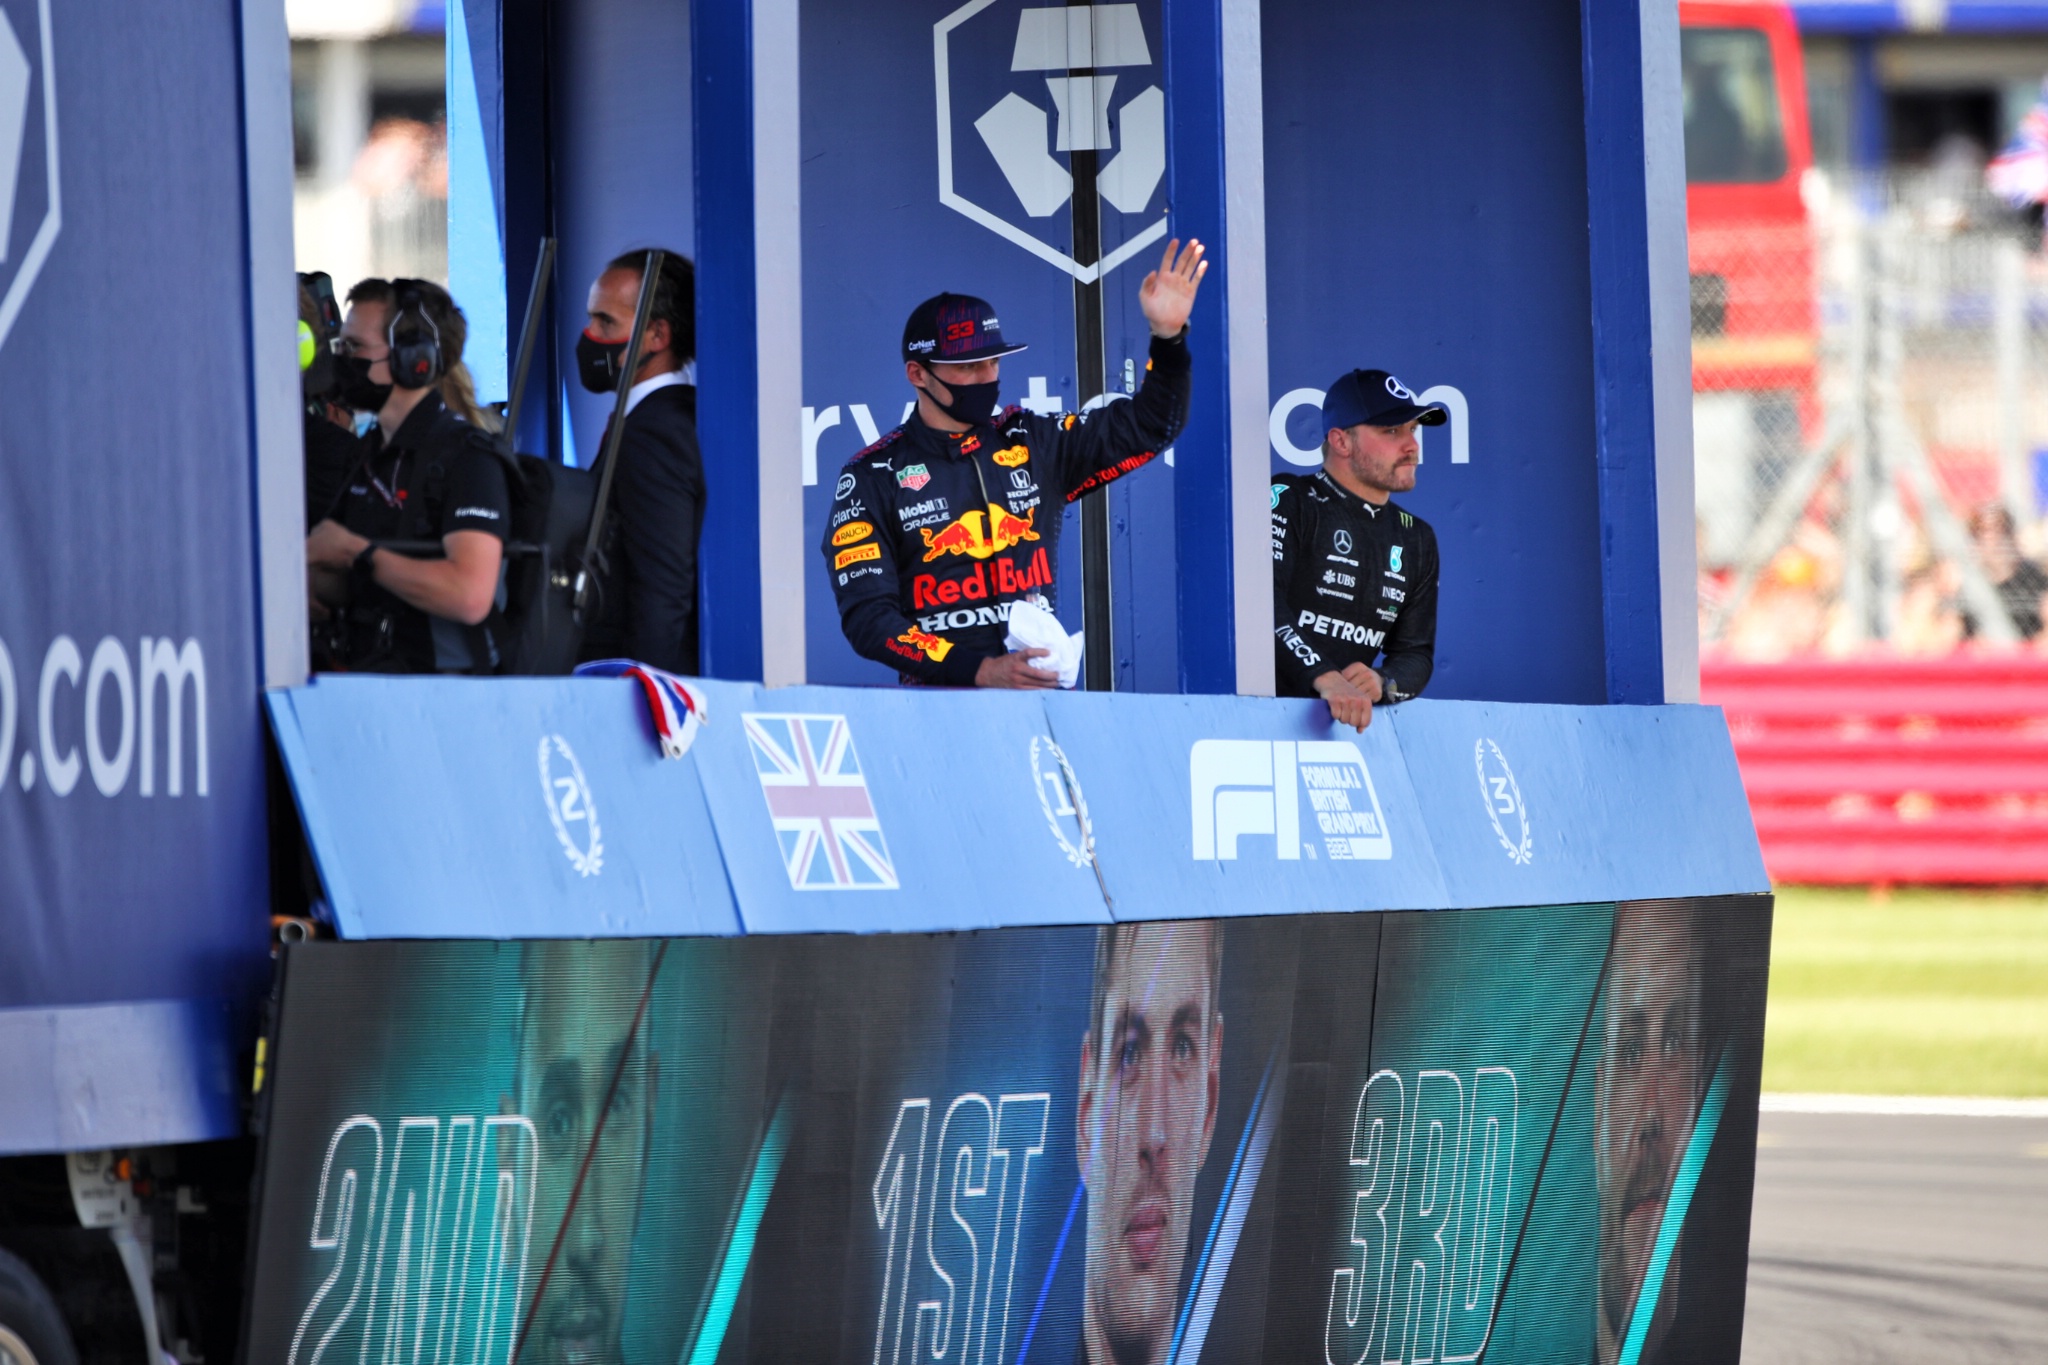 Lewis Hamilton (GBR) Mercedes AMG F1; Max Verstappen (NLD) Red Bull Racing; and Valtteri Bottas (FIN) Mercedes AMG F1 on the Sprint Victory Lap truck.